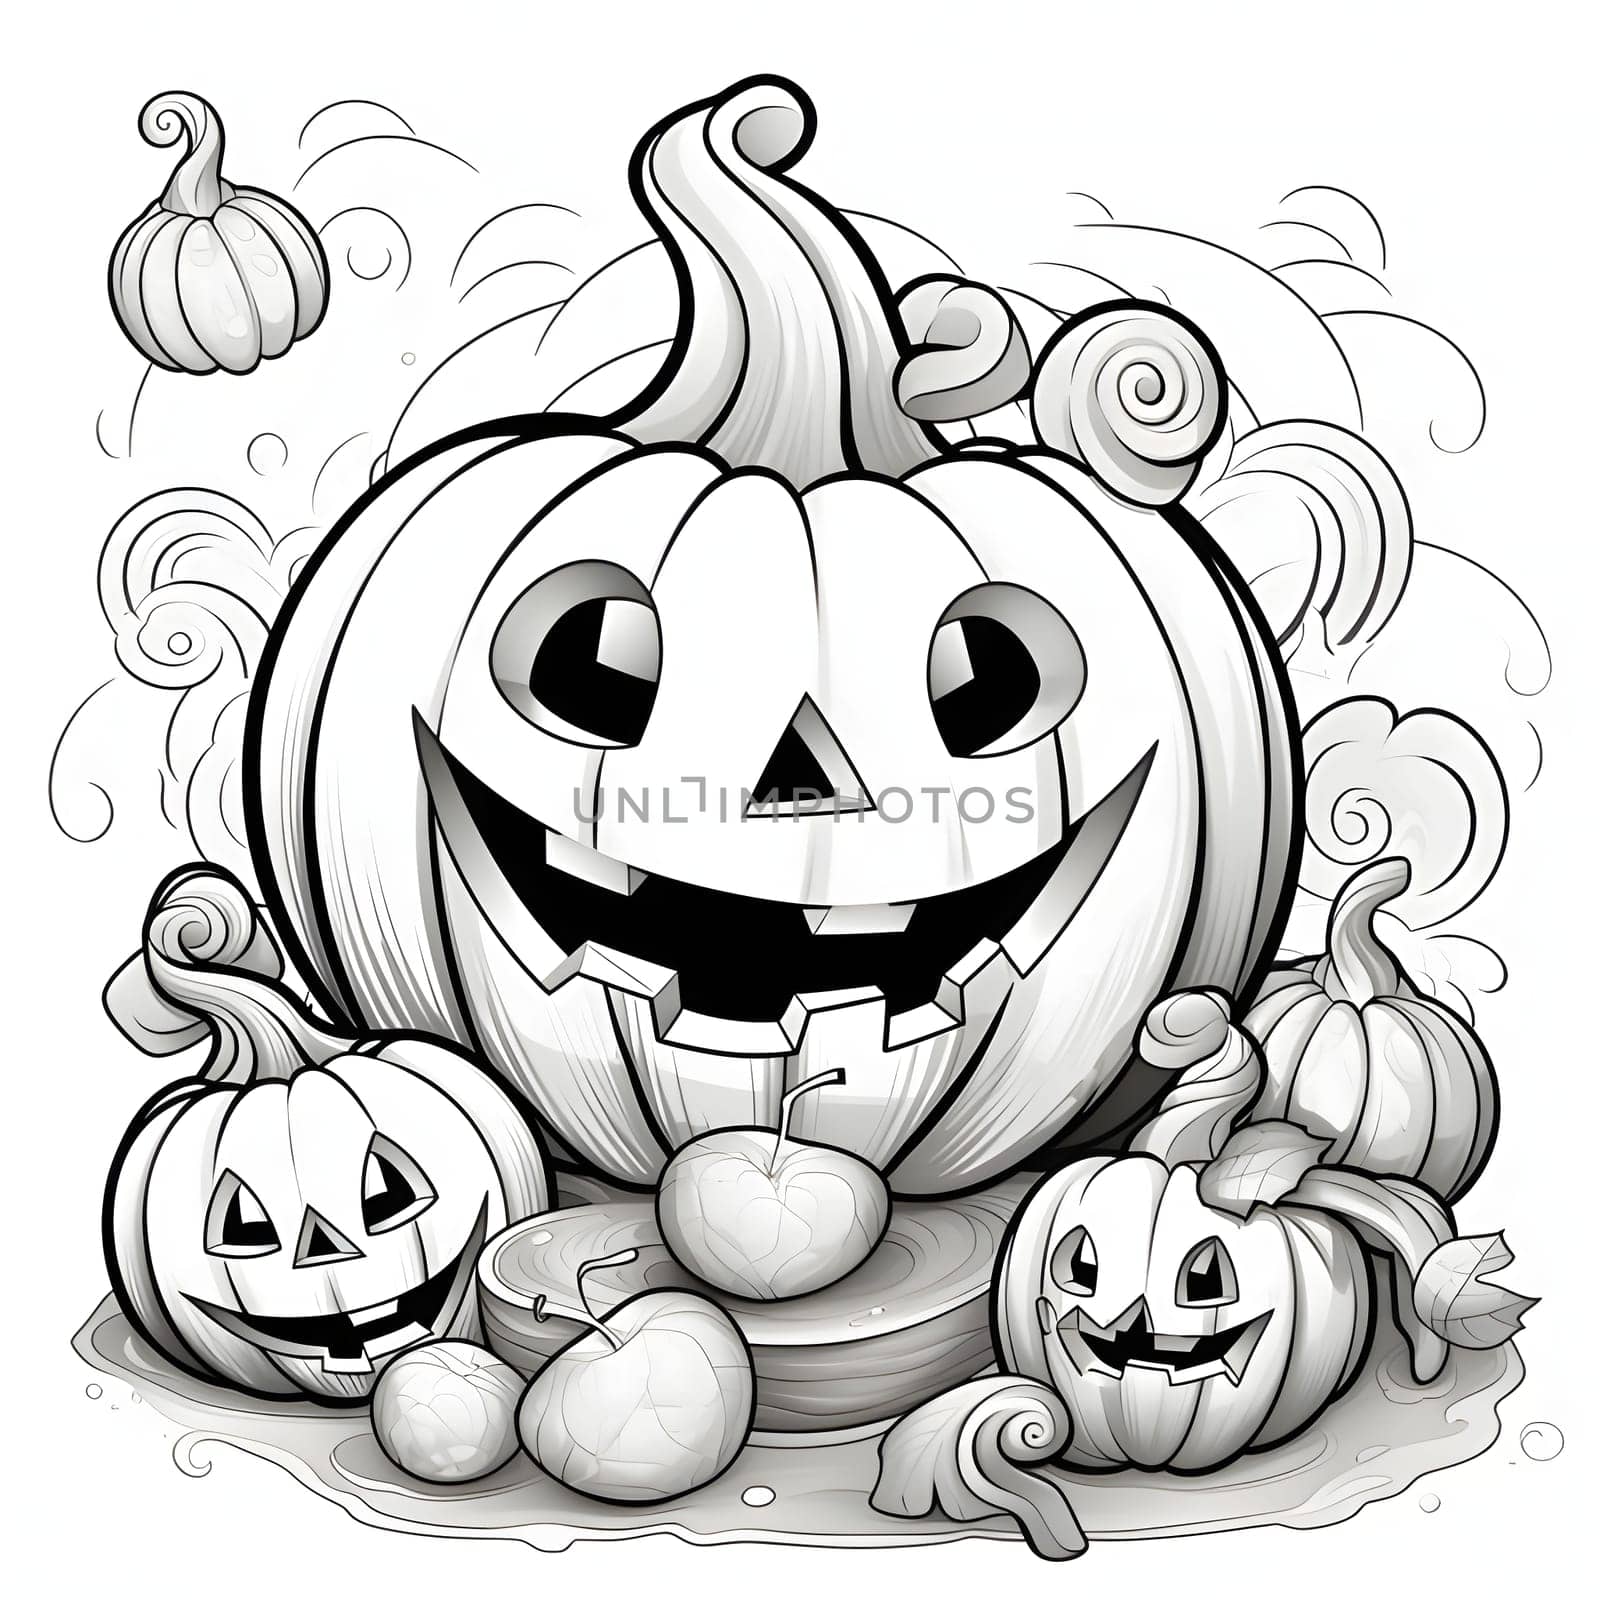 Three cheerful jack-o-lantern pumpkins and apples, Halloween black and white picture coloring book. by ThemesS